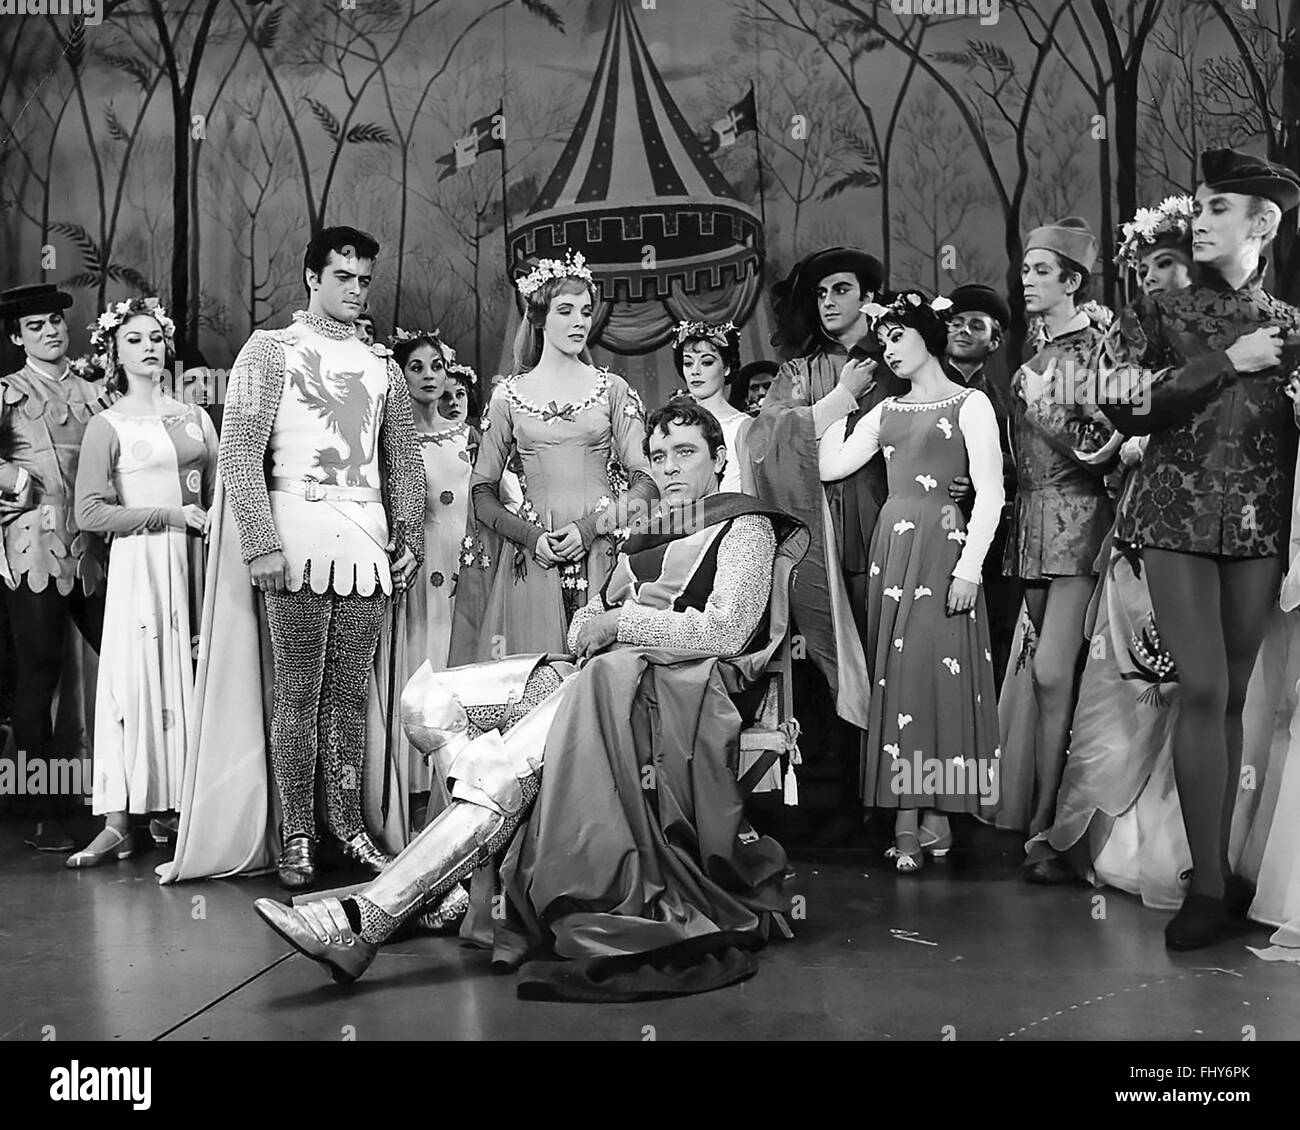 CAMELOT 1960 Broadway musical by Lerner and Lowe with Julie Andrews as  Queen Guenever and Richard Burton as King Arthur Stock Photo - Alamy